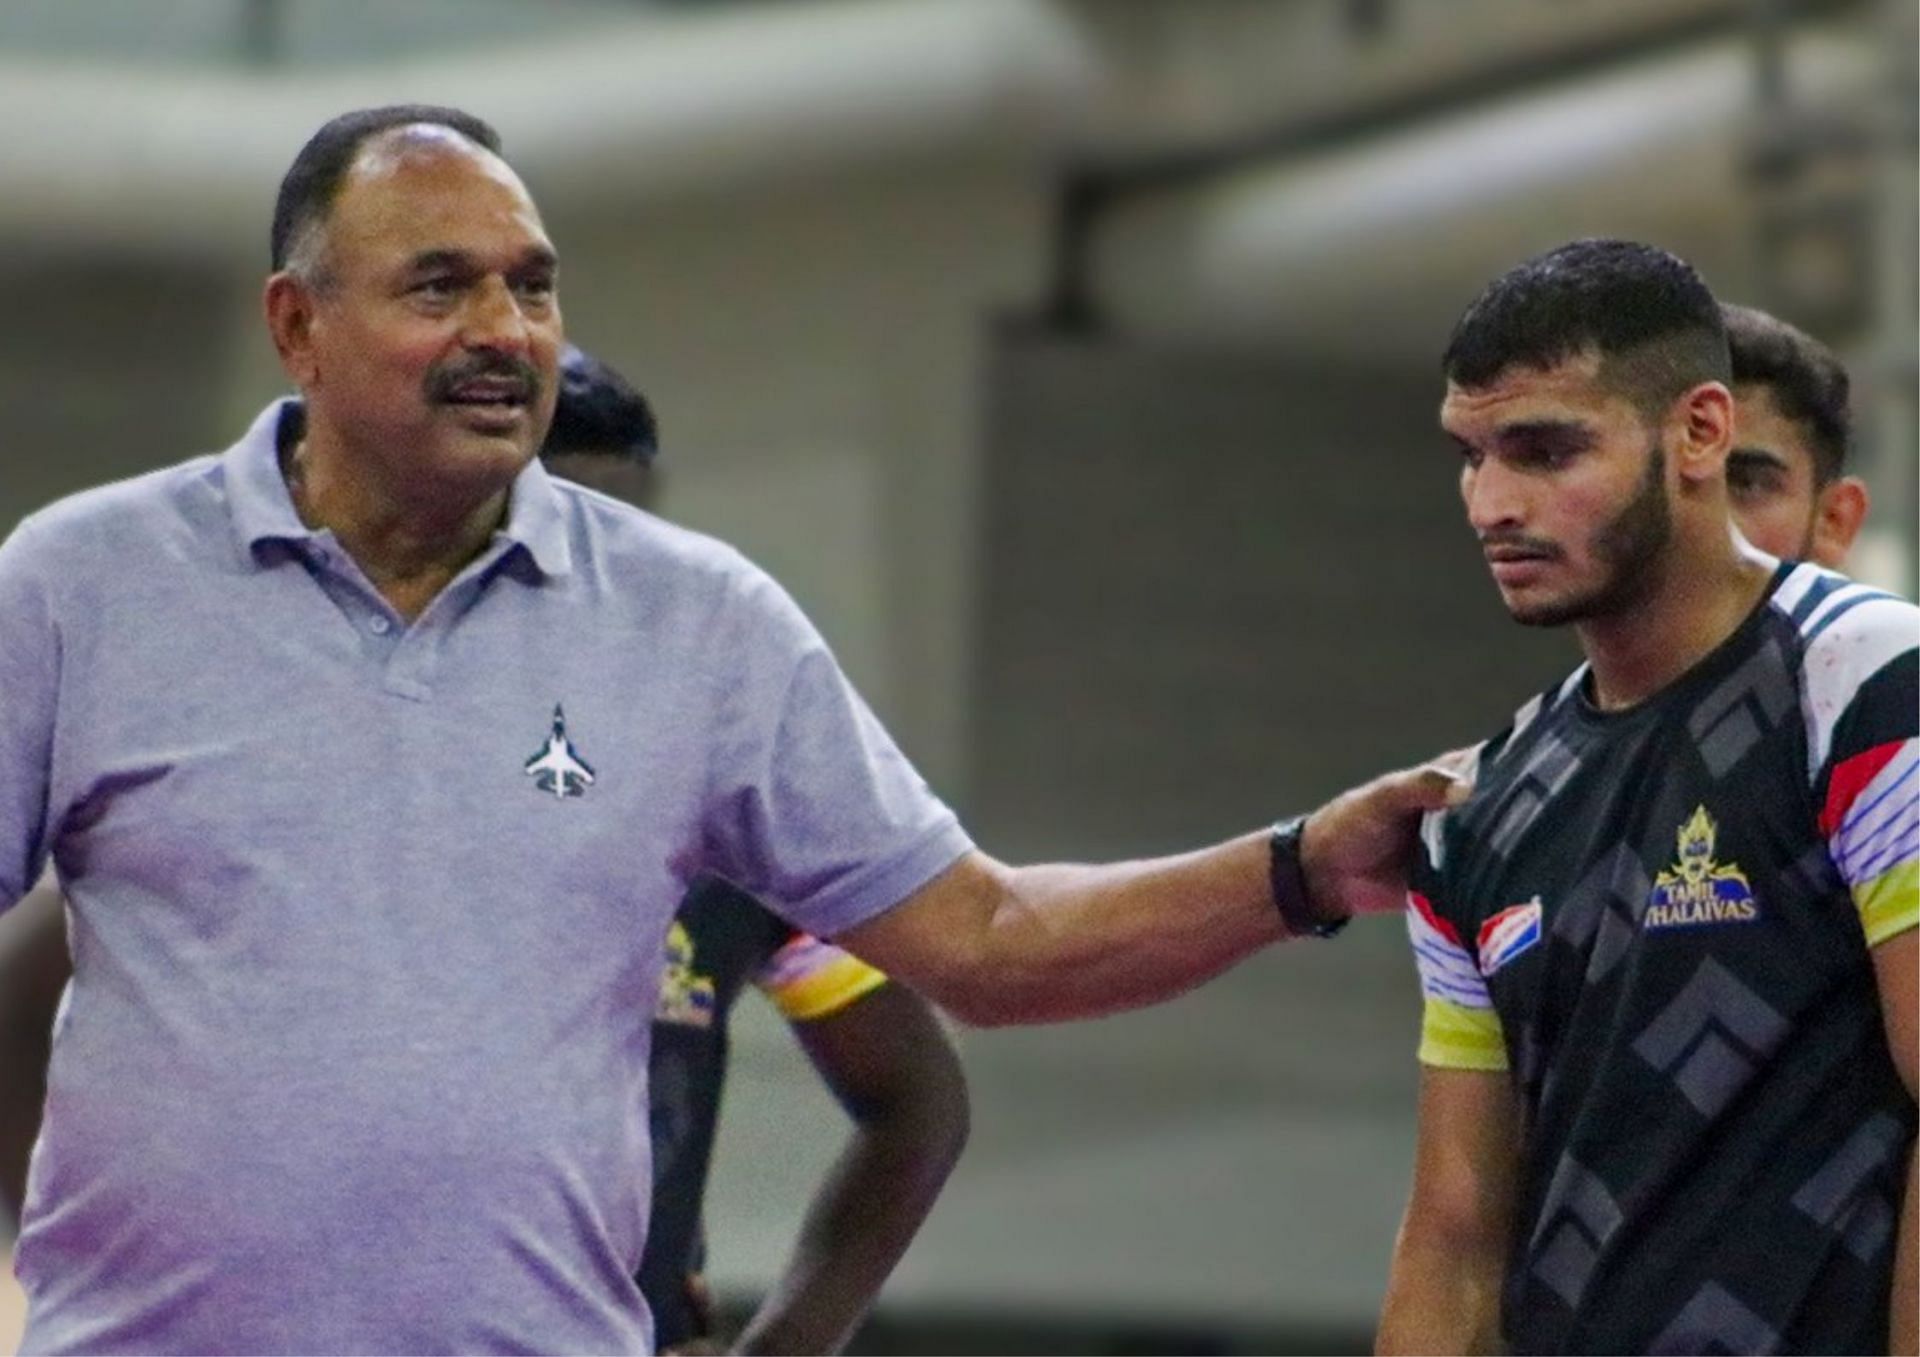 Tamil Thalaivas part ways with coach Ashan Kumar after failing to qualify for playoffs in PKL 10